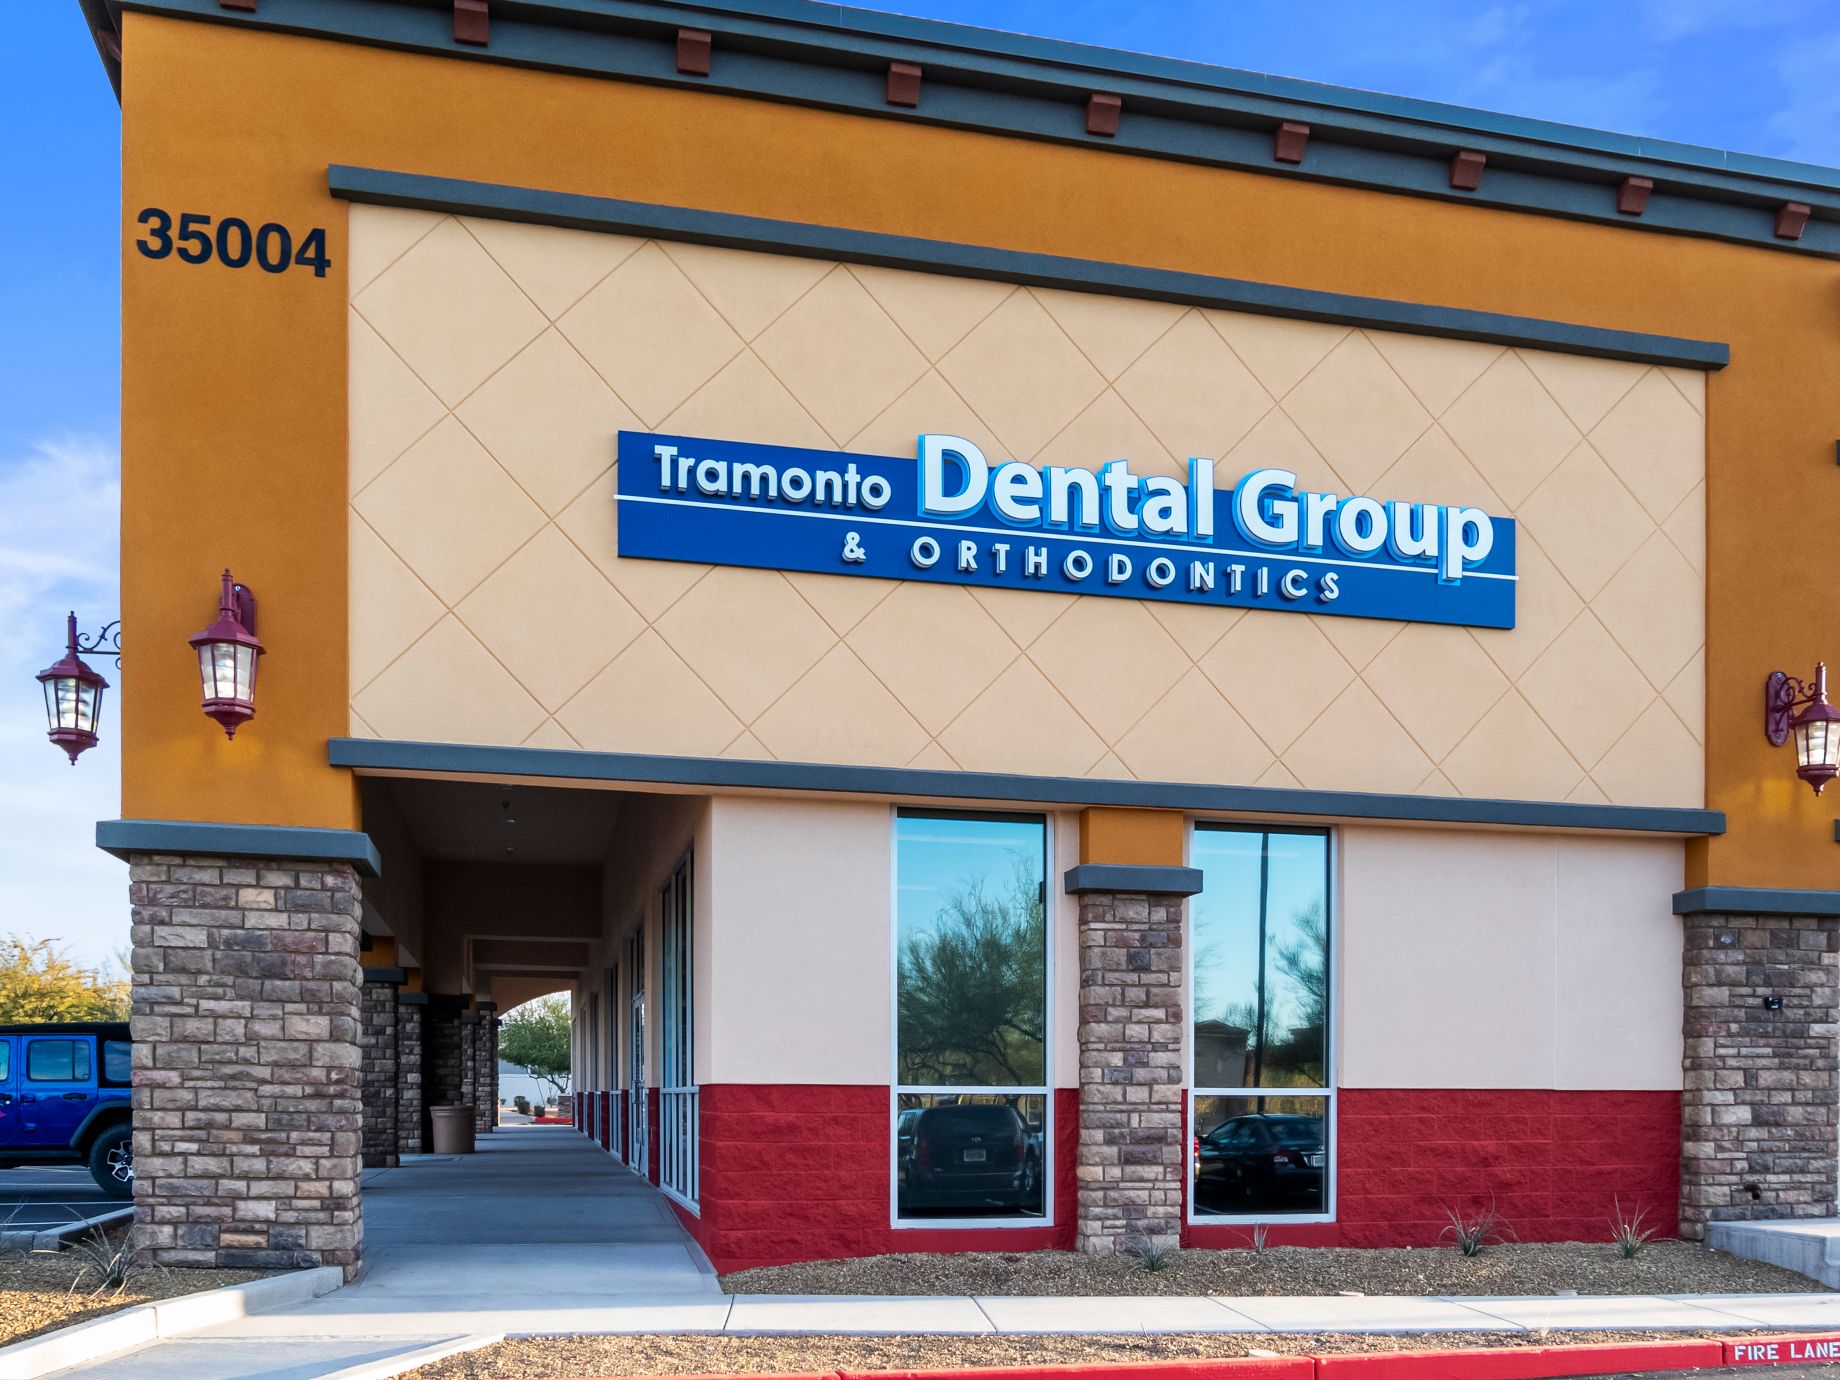 Looking for a family dentist in Phoenix, AZ? You have come to the right spot!